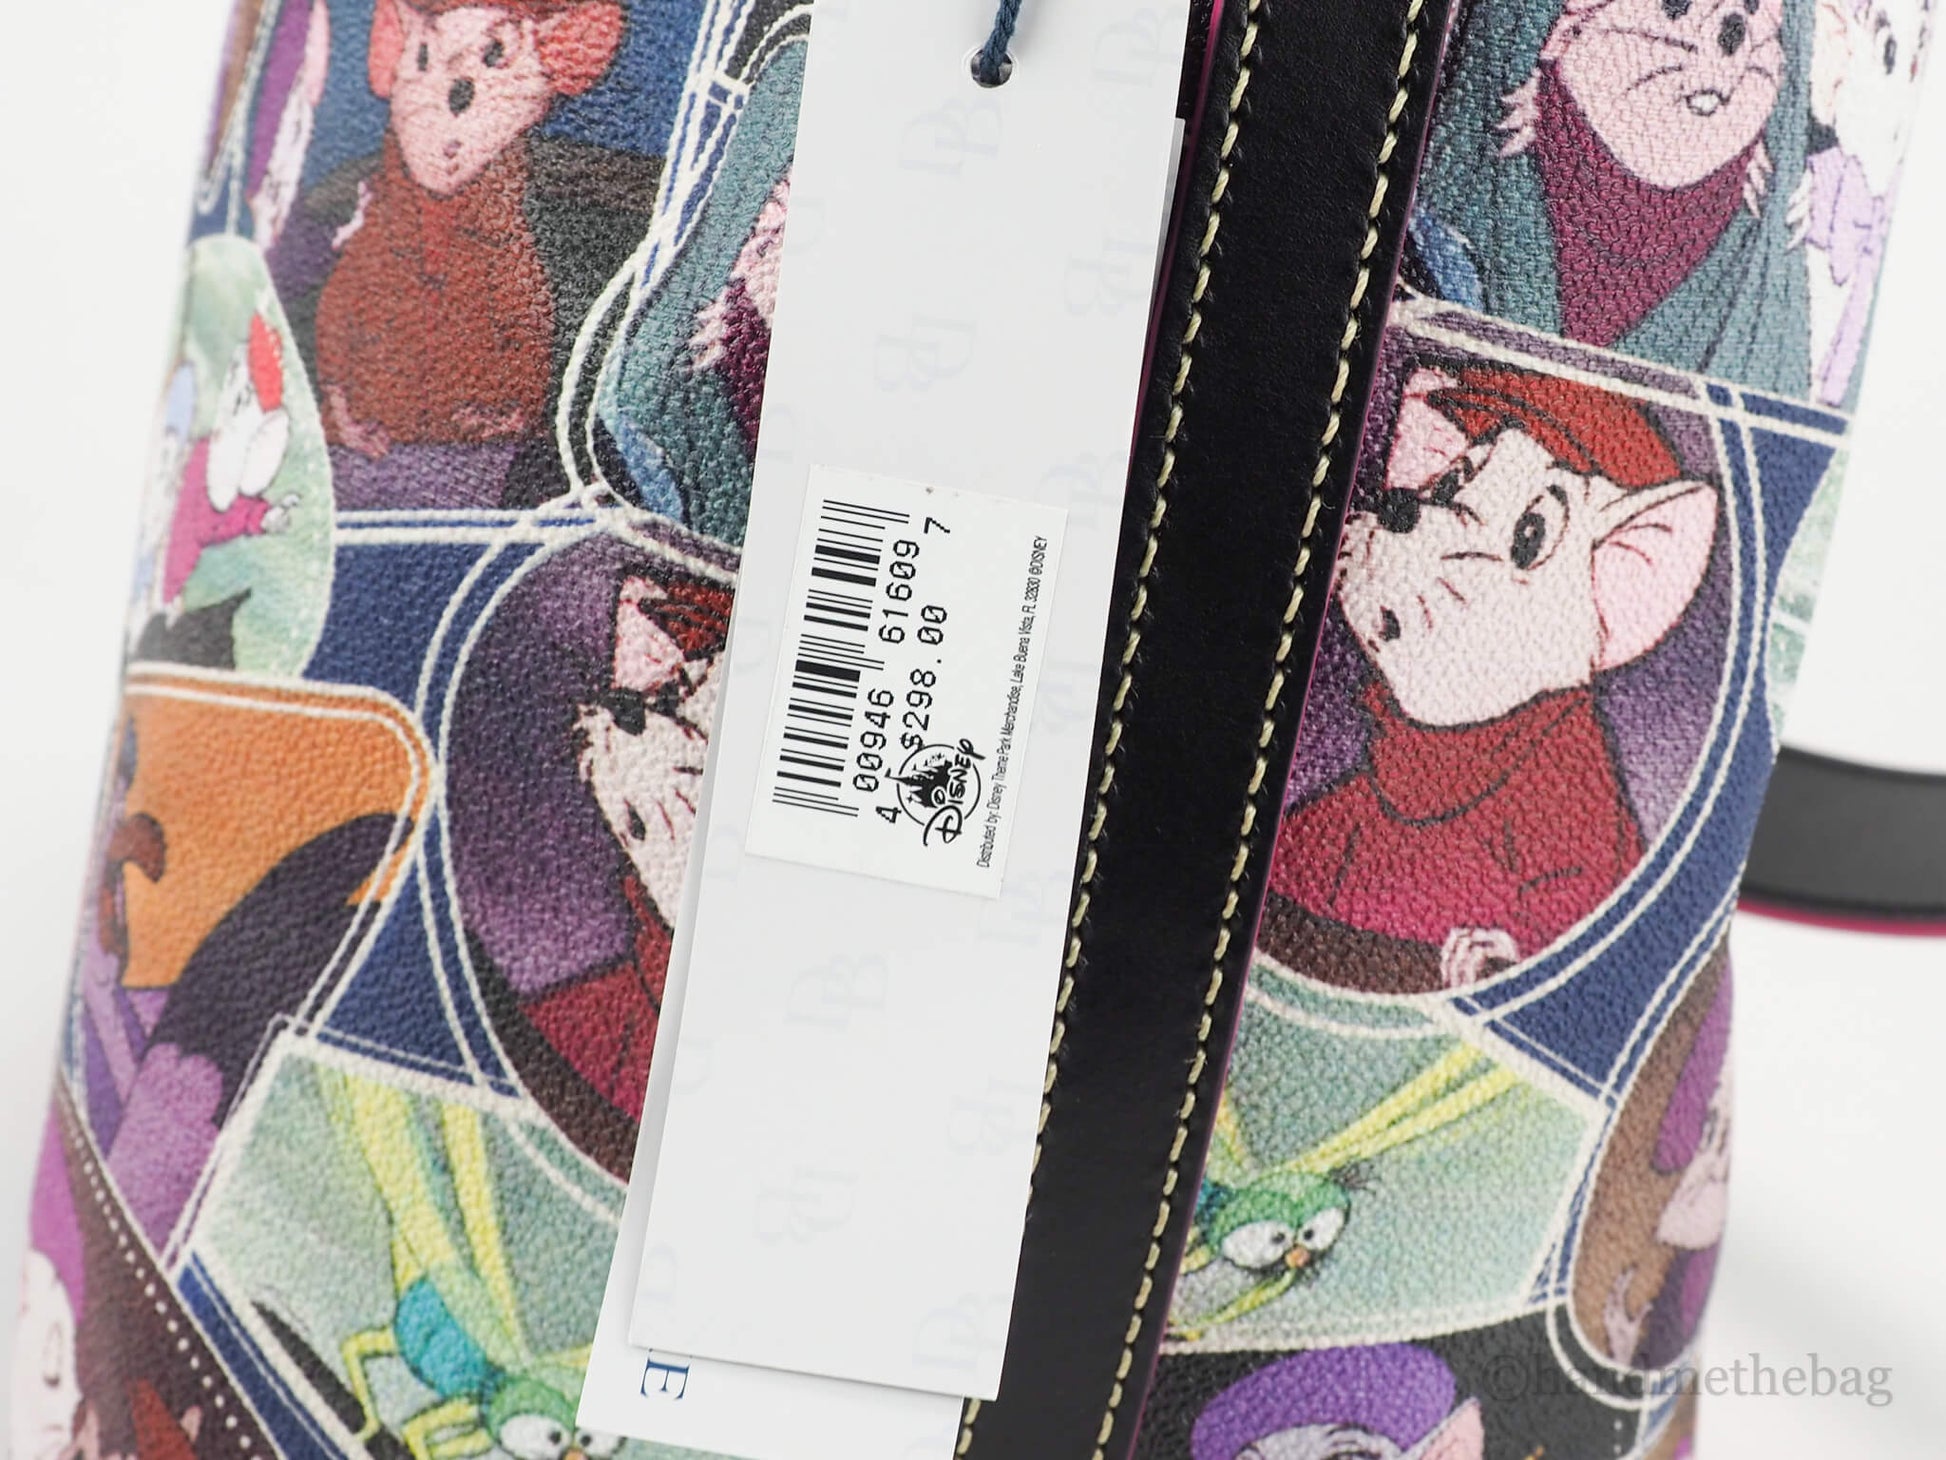 Dooney and Bourke Rescuers drawstring bag tag on white background 